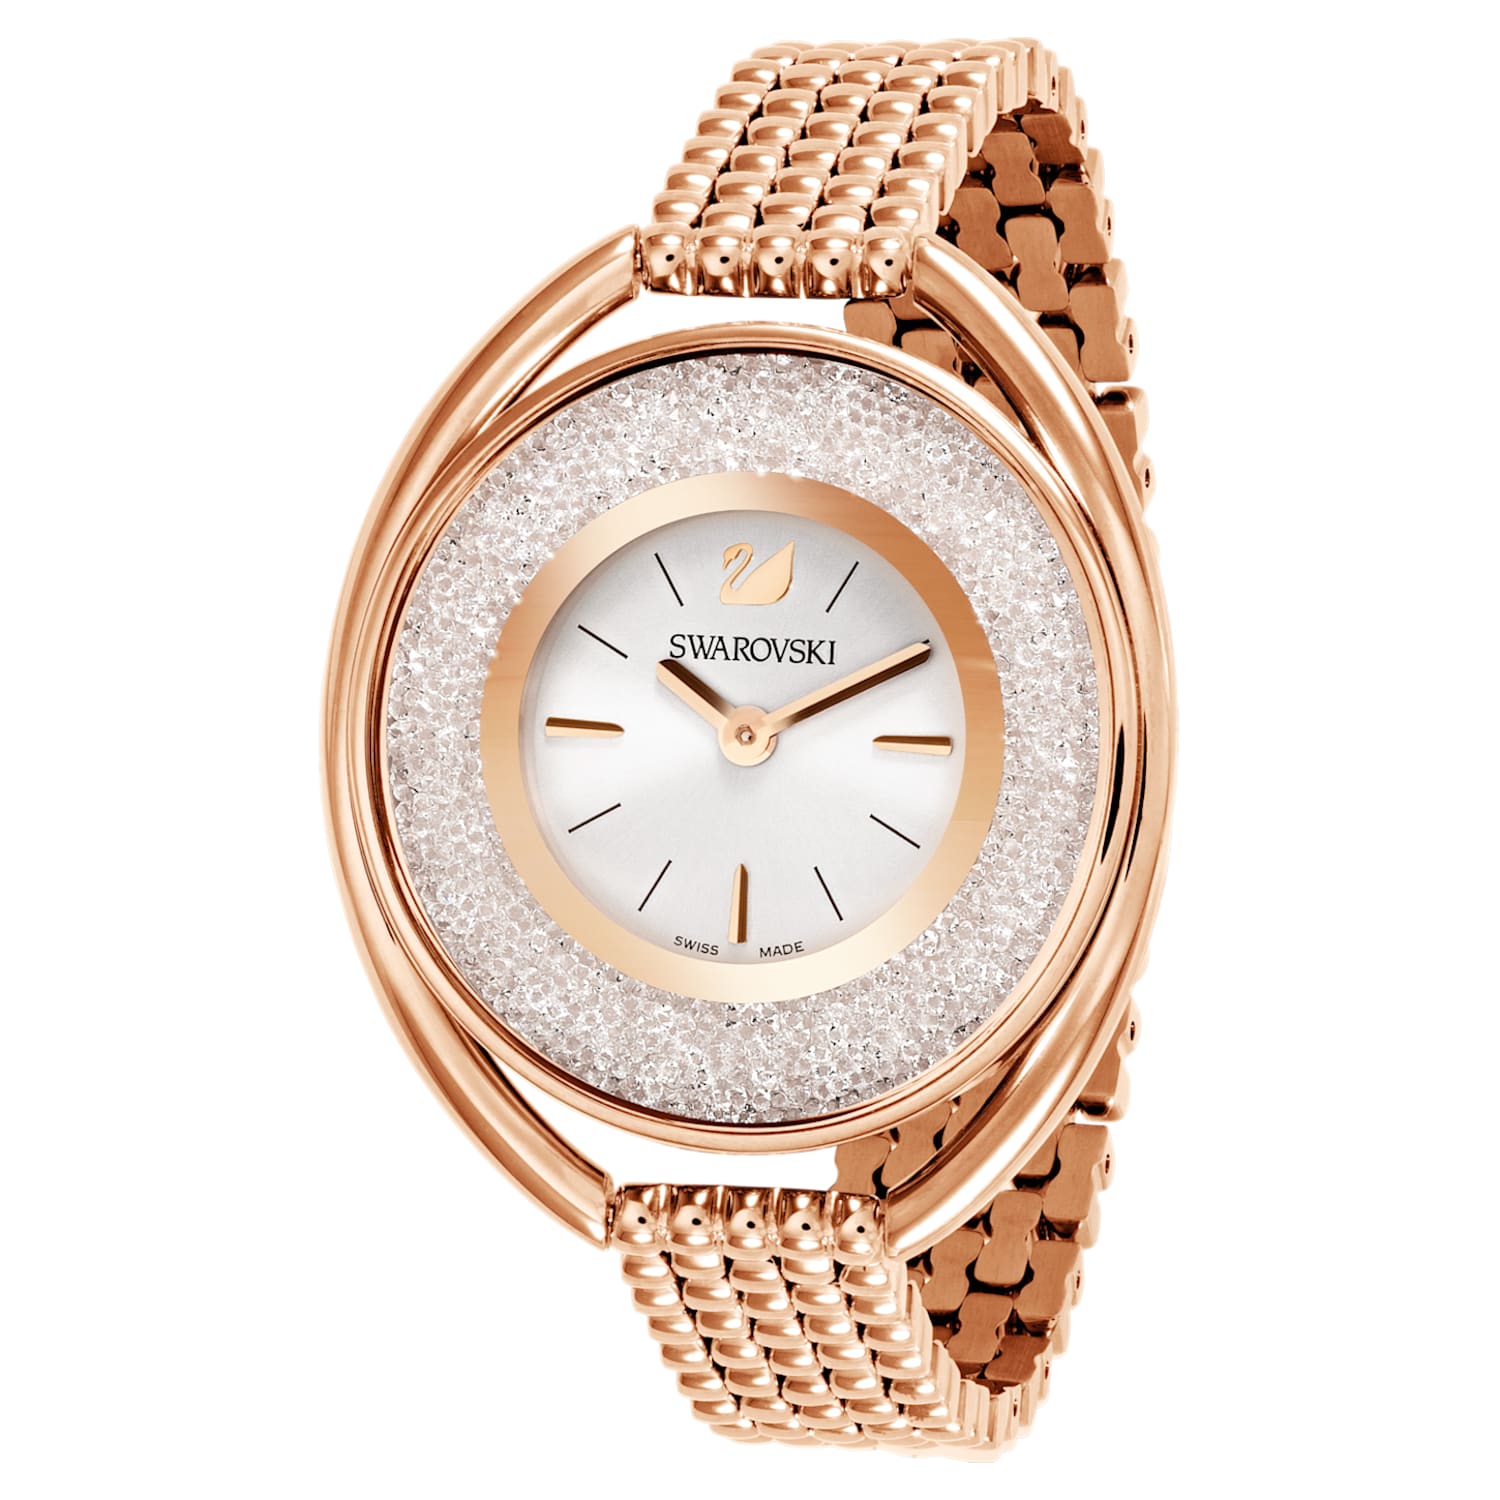 Crystalline Oval Watch, Metal bracelet, White, Rose-gold tone PVD